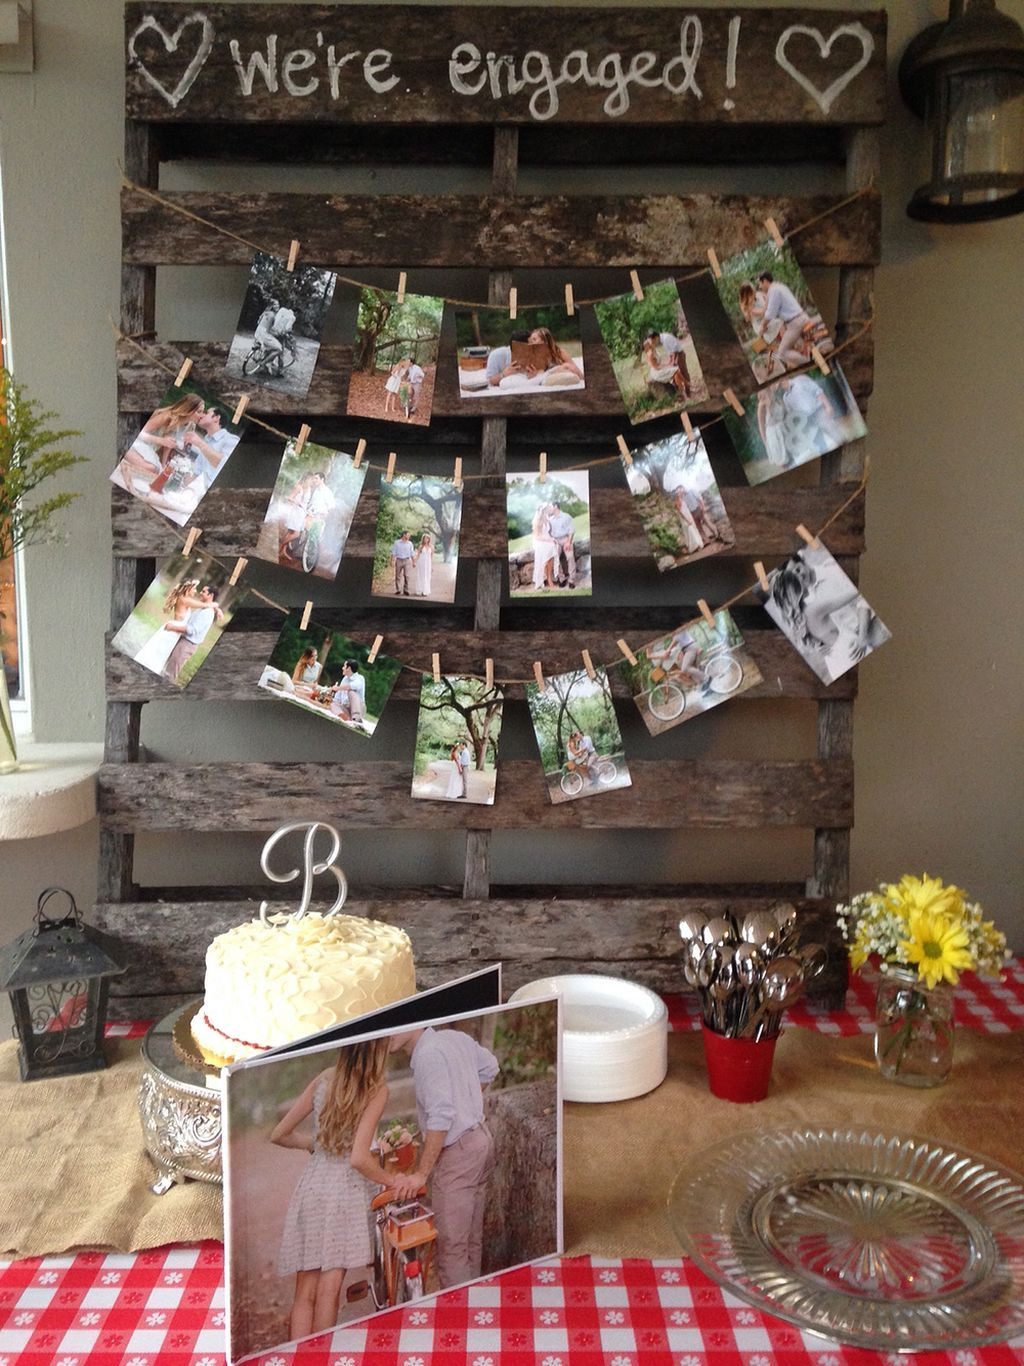 Engagement Party Backyard Ideas
 Tips for Looking Your Best on Your Wedding Day